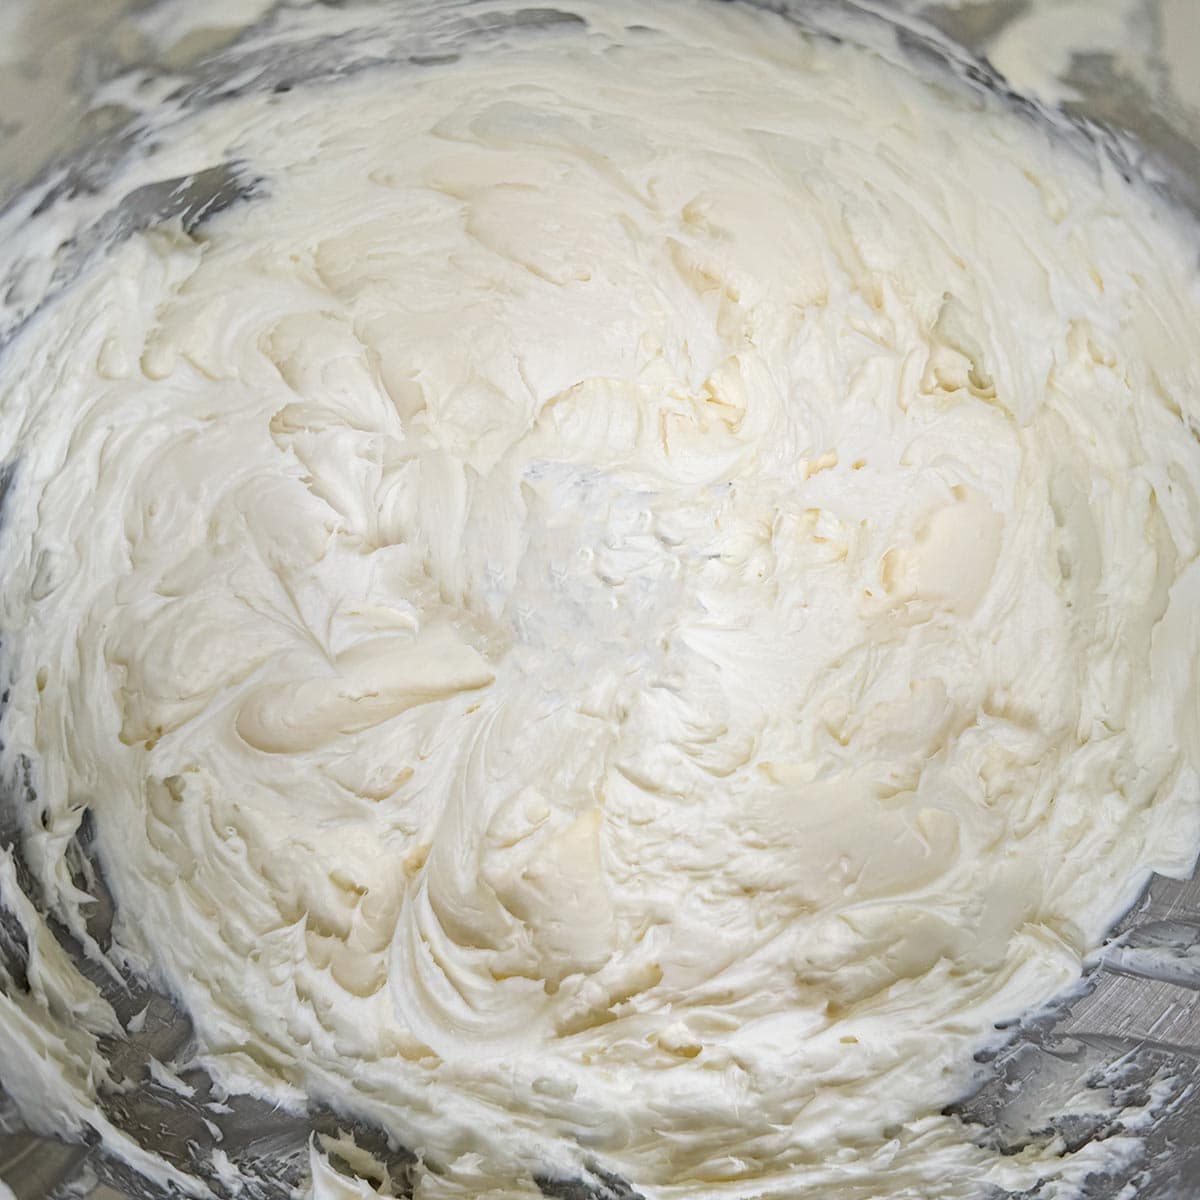 Cream cheese and sugar blended into a creamy mixture.